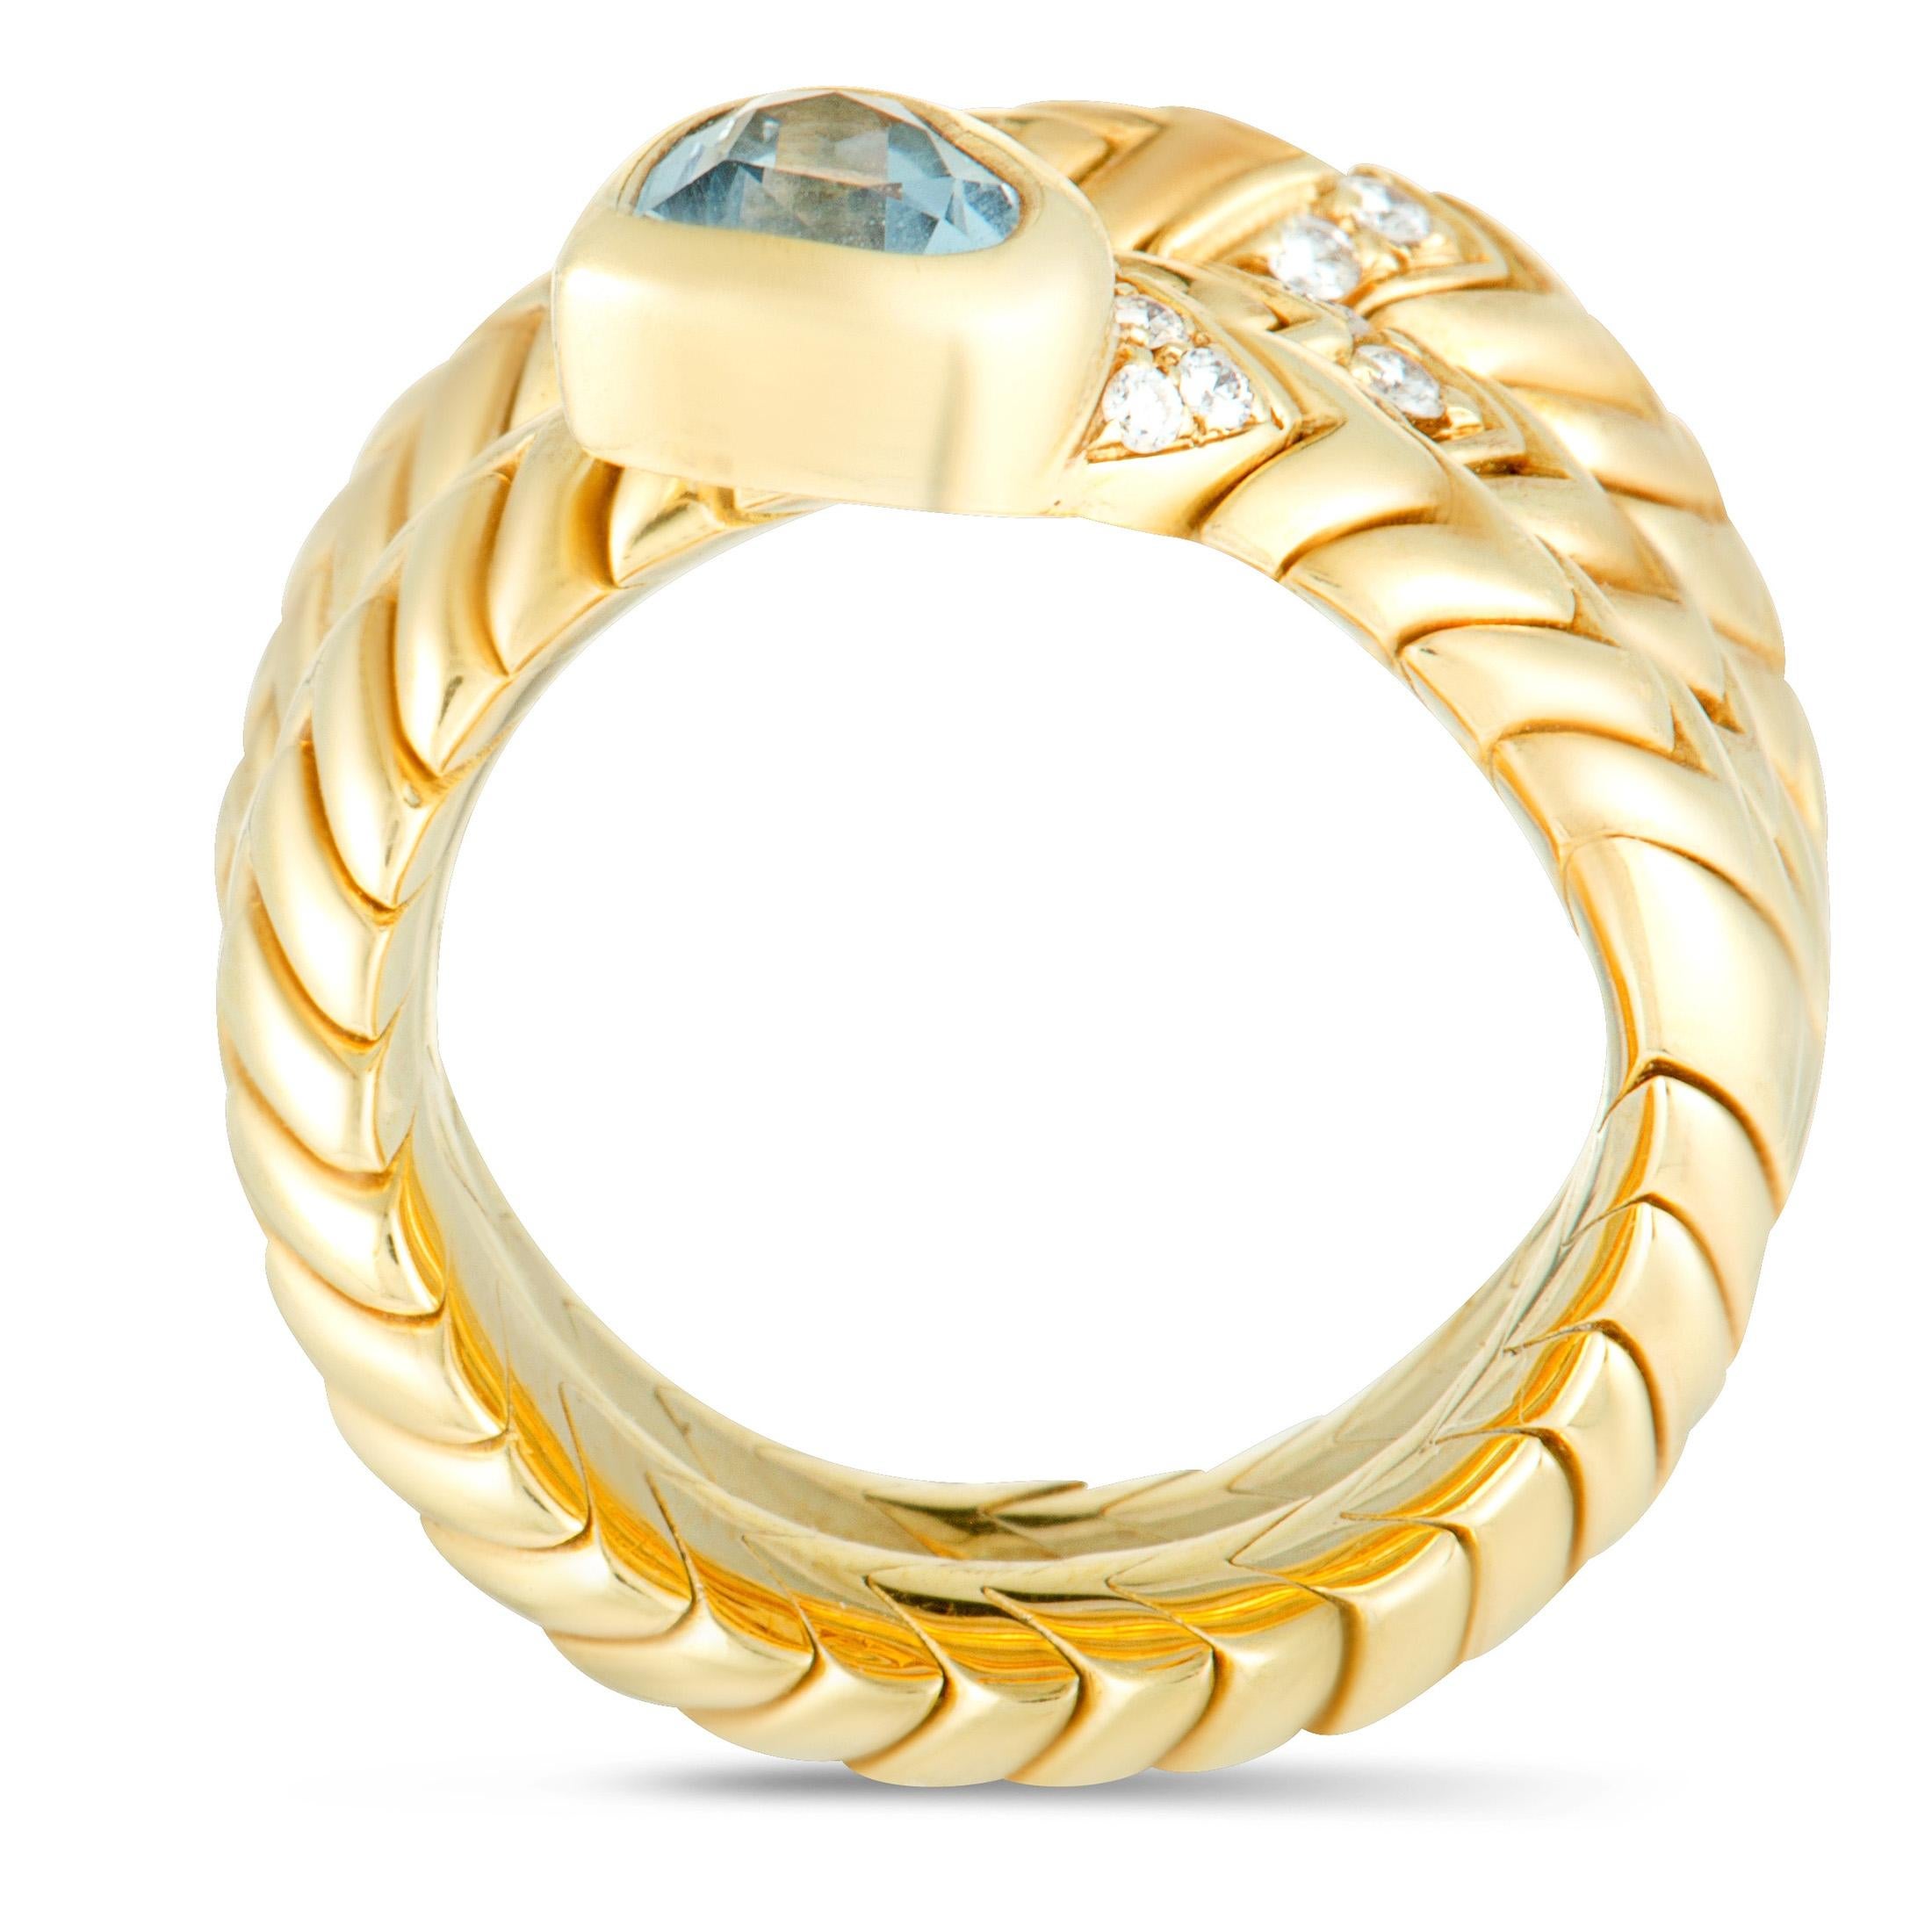 Stealing your attention with its stunning serpenti design, this exceptional ring by Bulgari from its sensational Spiga collection is absolutely exquisite! Gorgeously crafted from prestigious 18K yellow gold, the fabulous ring is embellished with